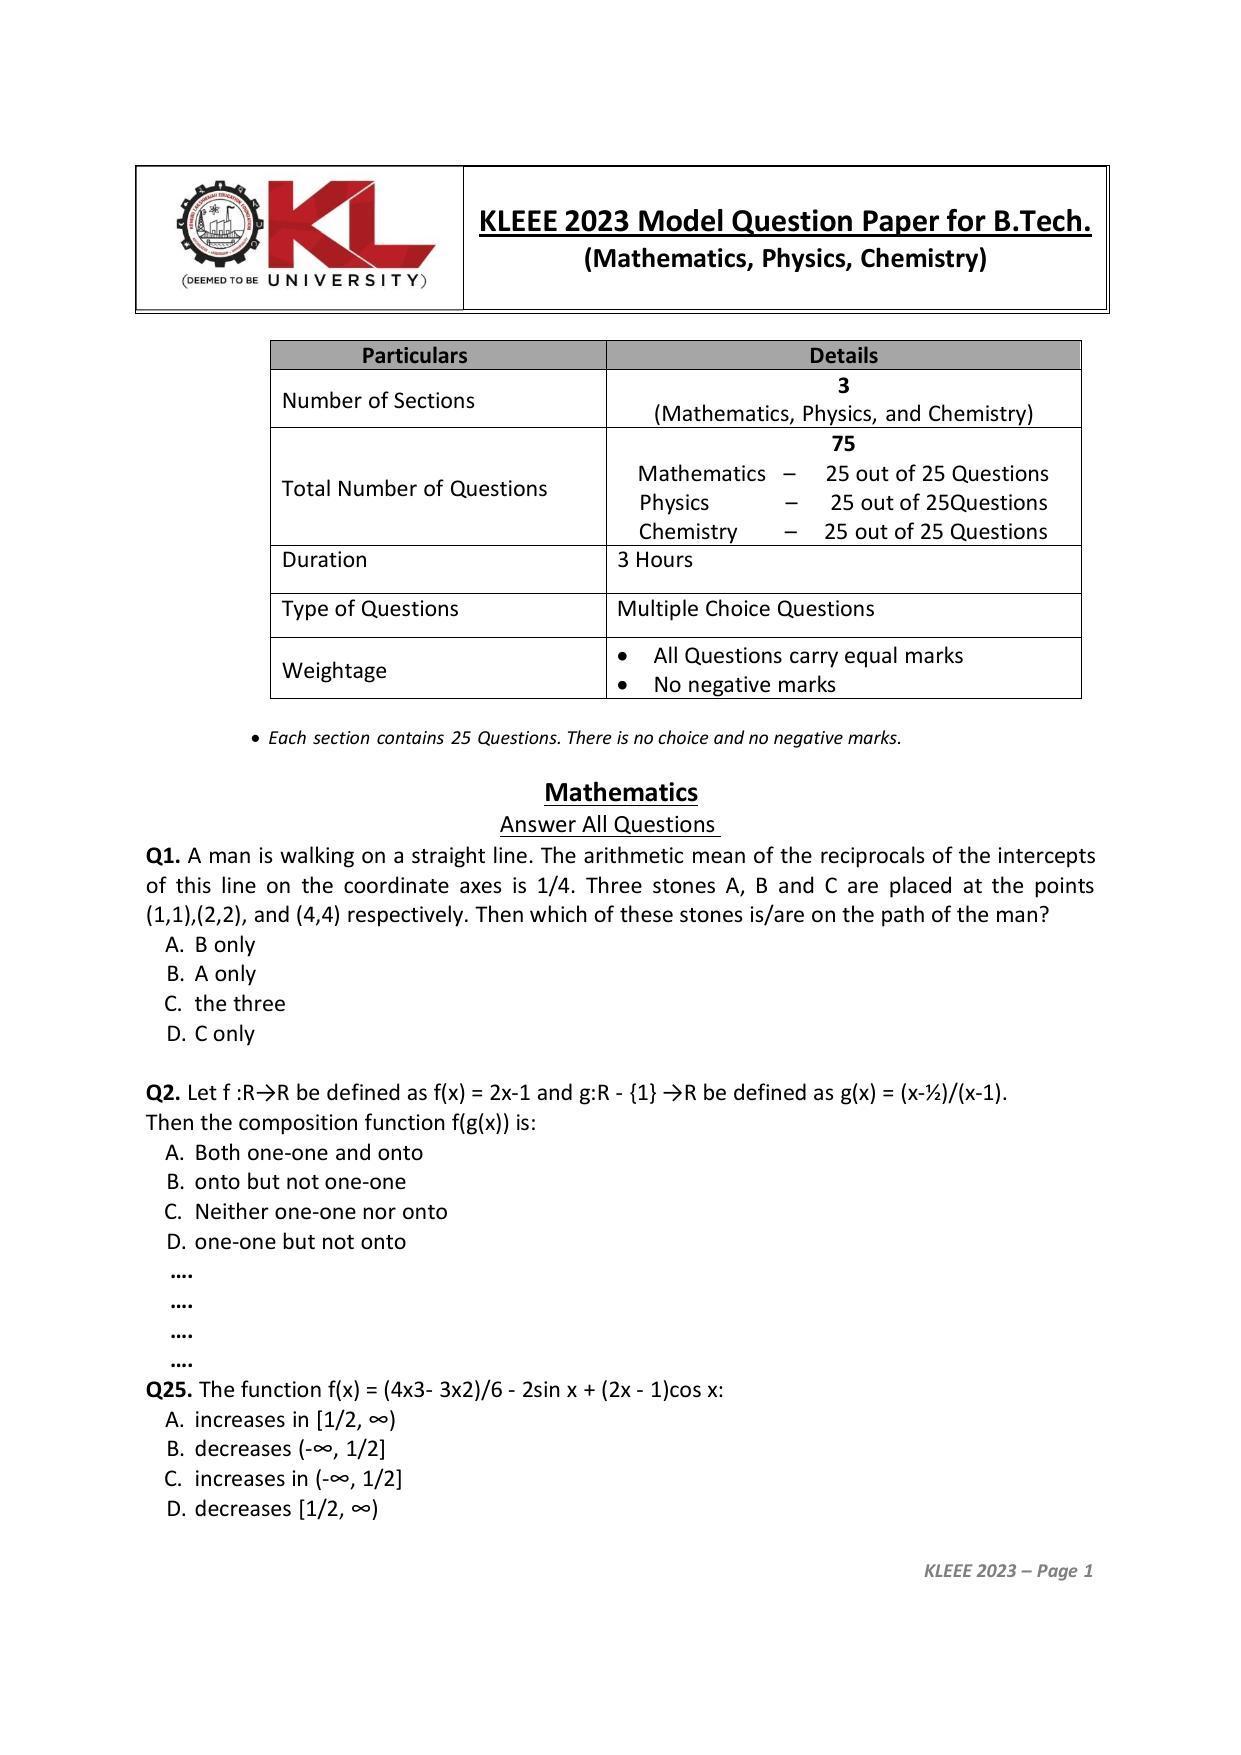 KLEEE 2023 Model Question Paper  - Page 1